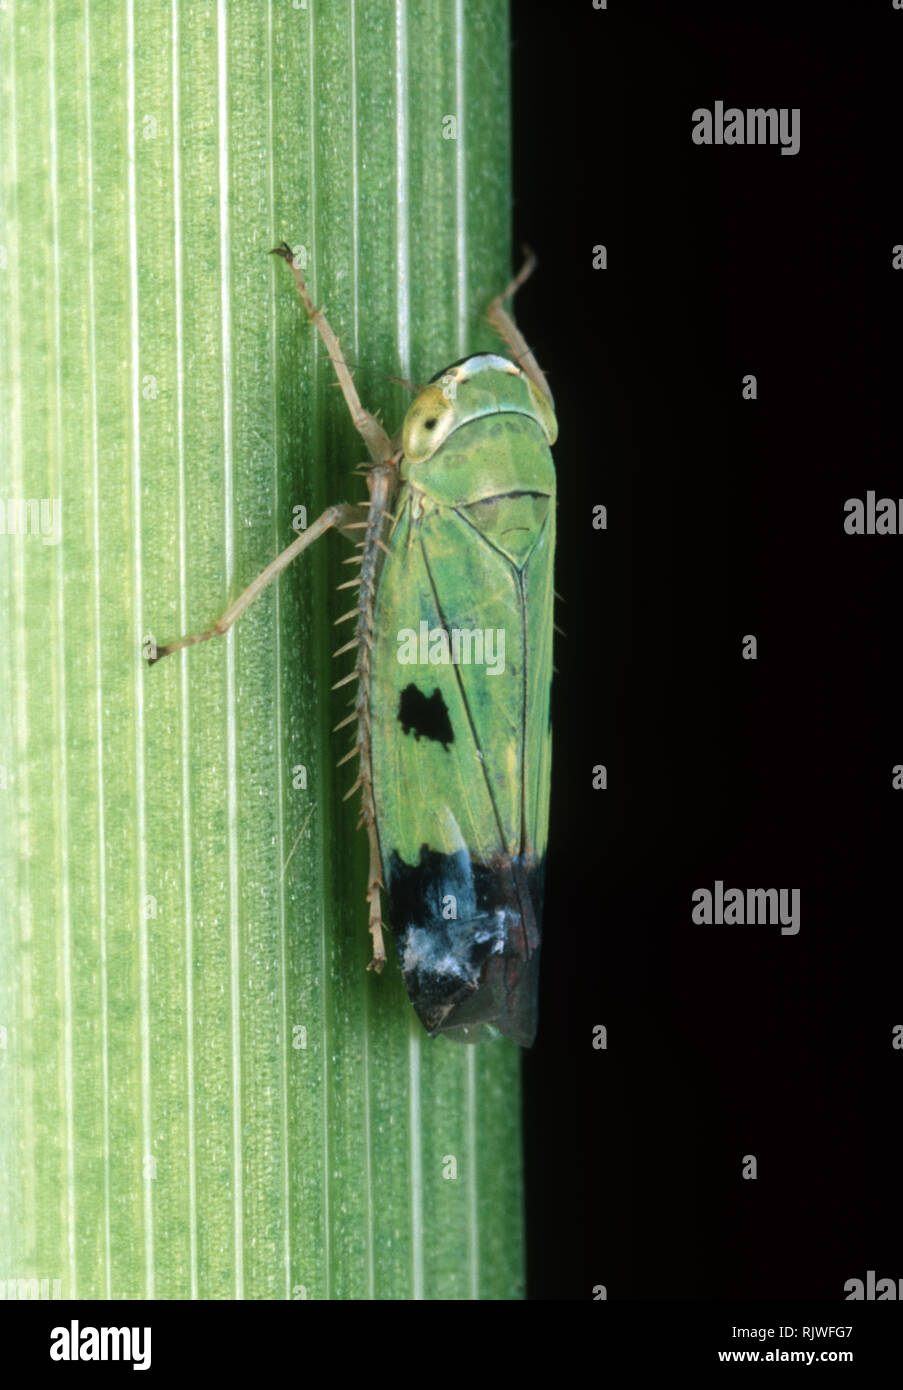 Nymph of a green paddy rice leafhopper (Nephotettix virescens) pest and disease vector of rice on a rice leaf, Philippines Stock Photo